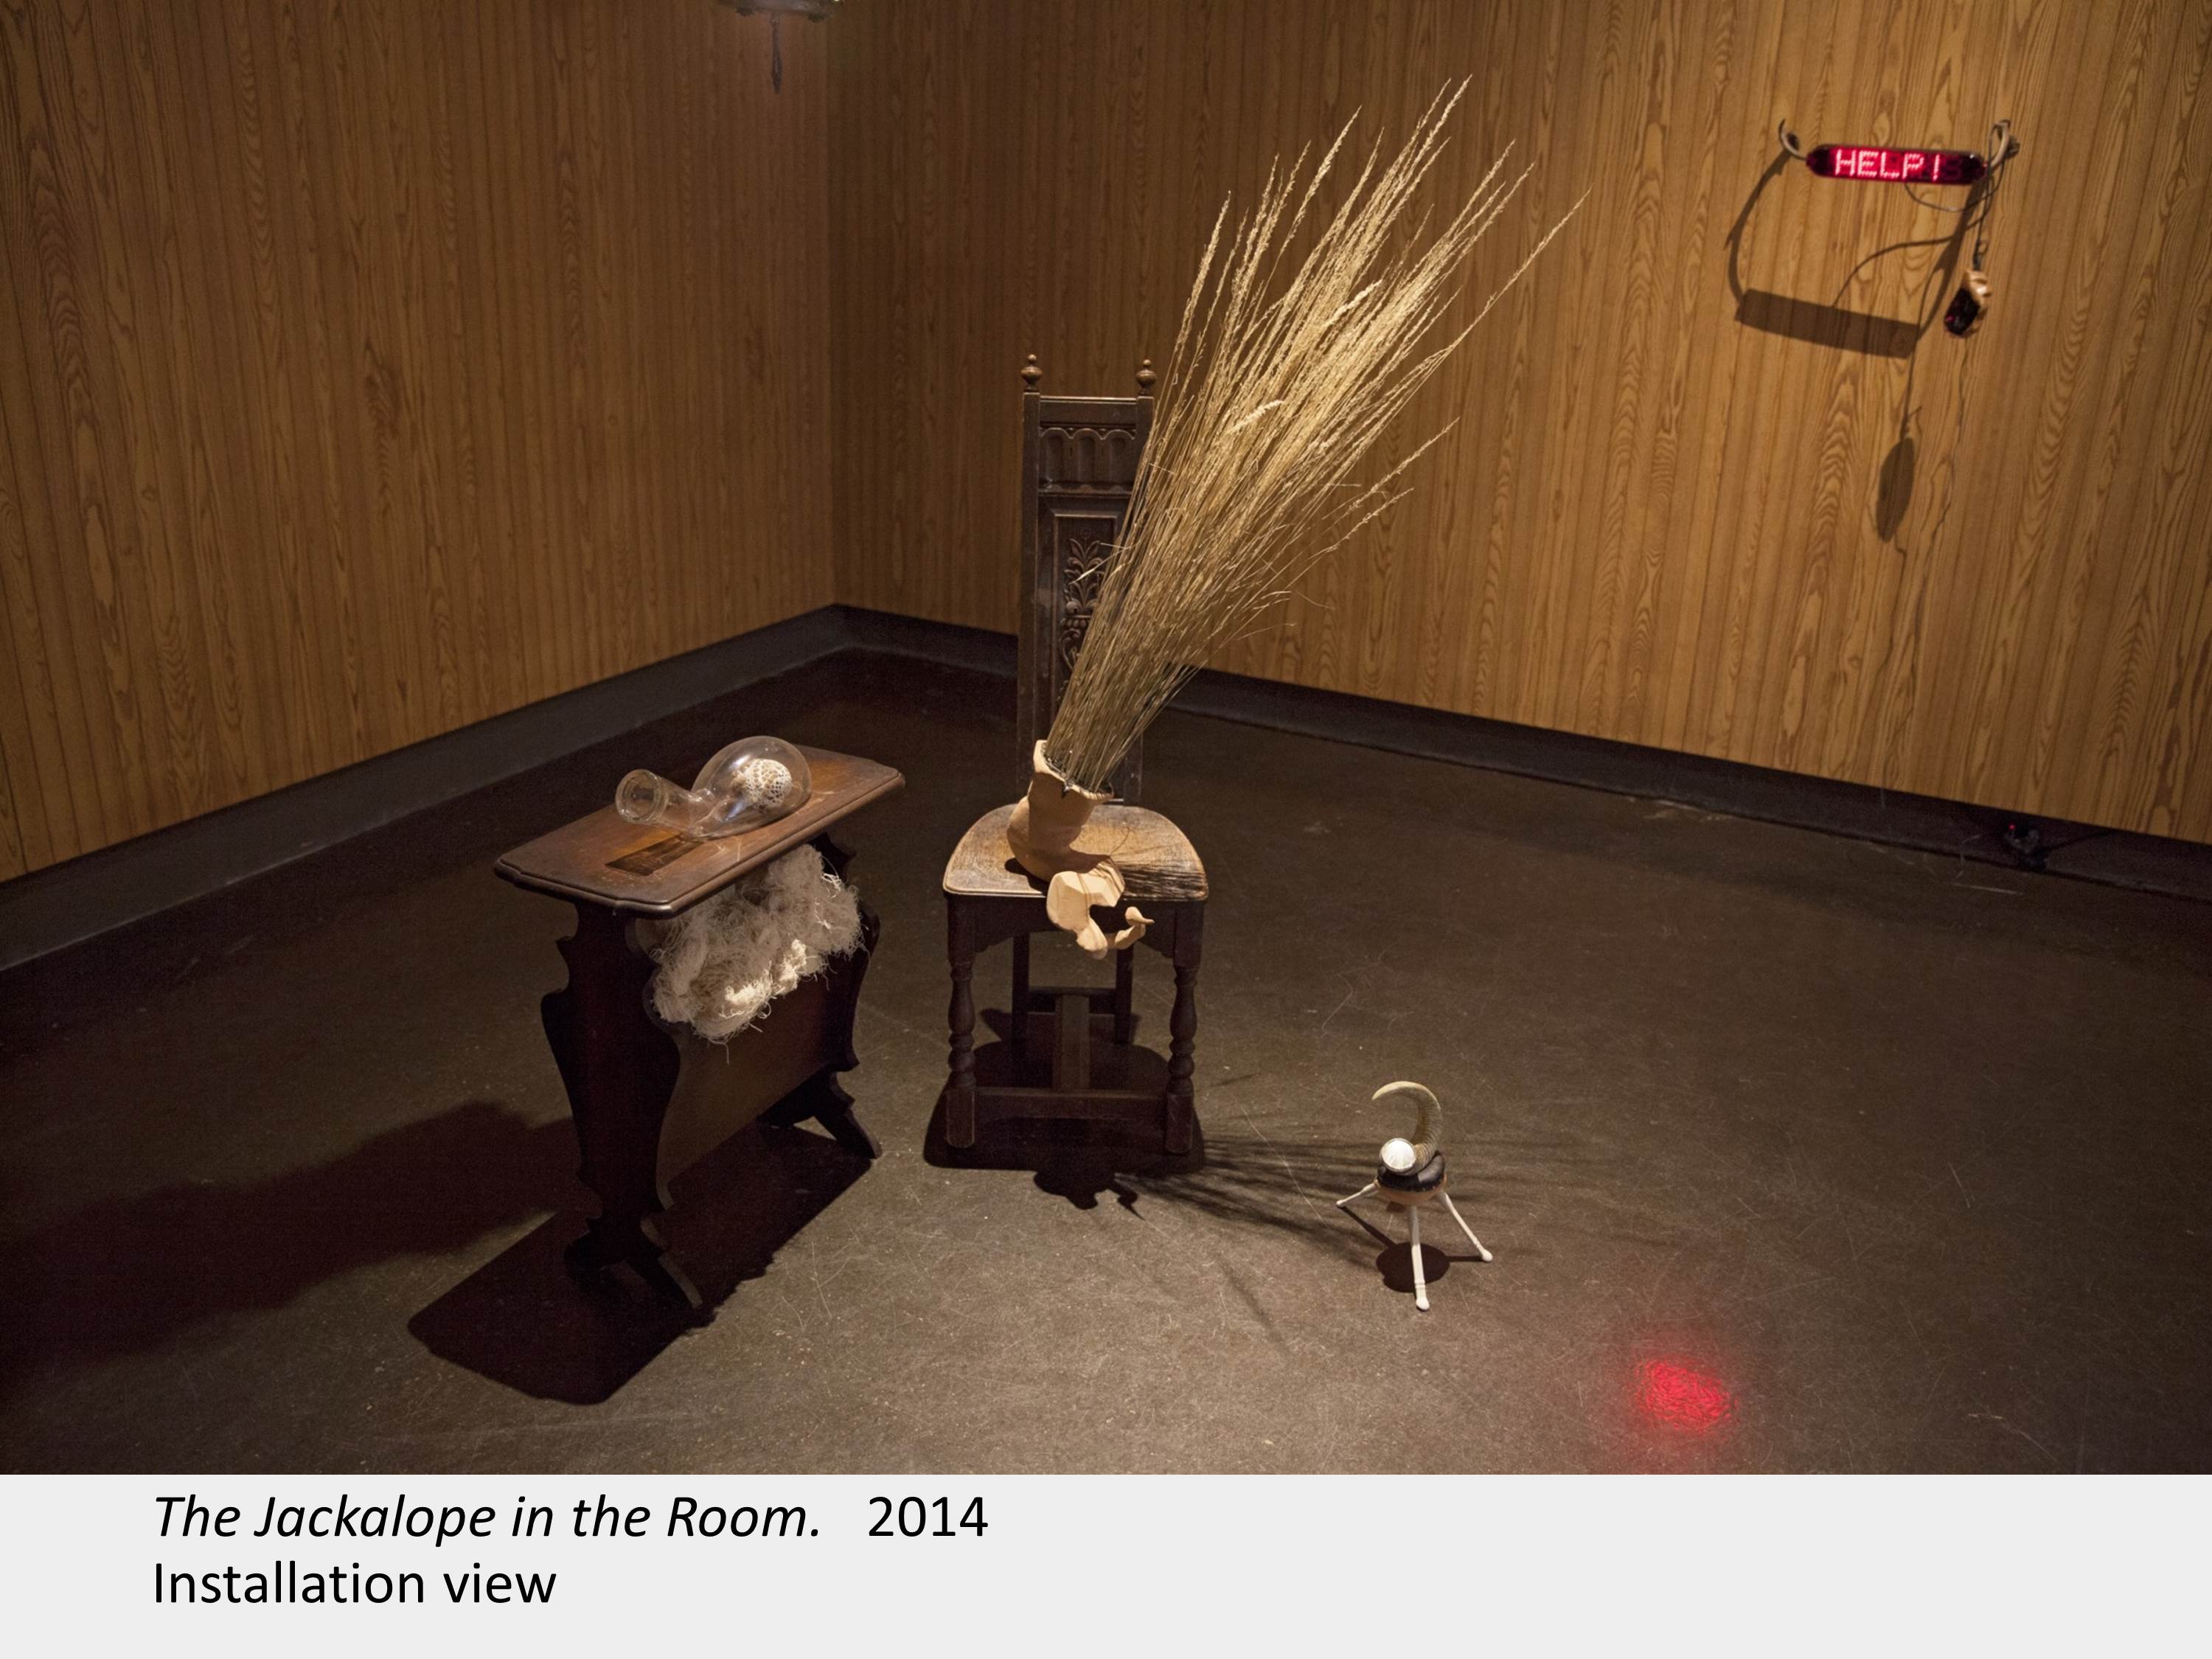 Artwork by Meghan Green. The Jackalope in the Room. 2014. Installation view.